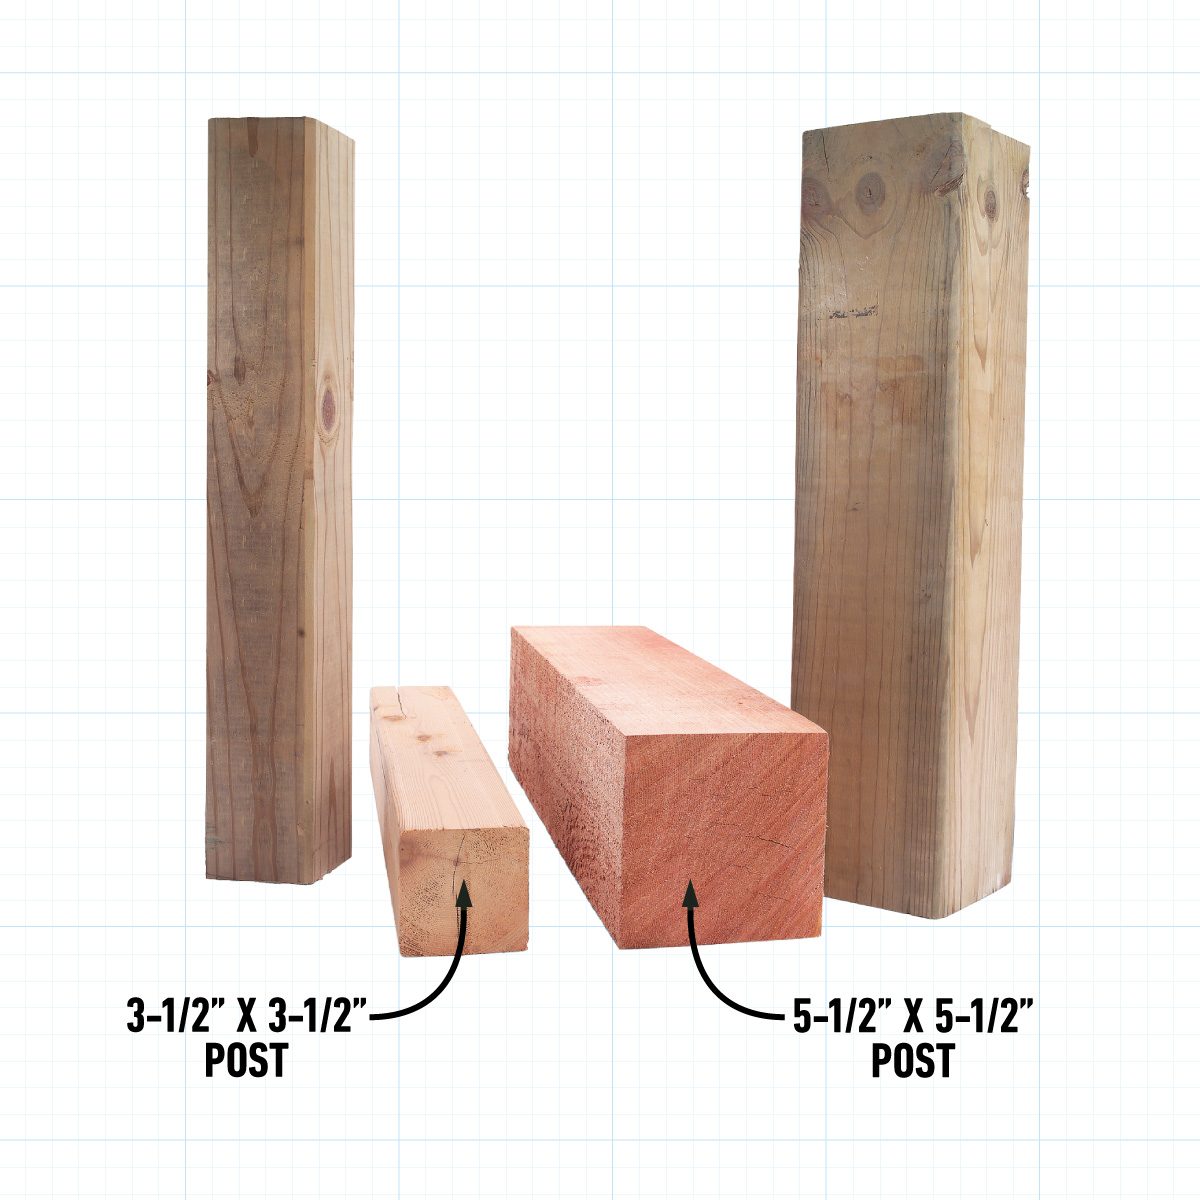 Tips For Choosing And Buying Deck Lumber Use Hefty Posts for High Decks